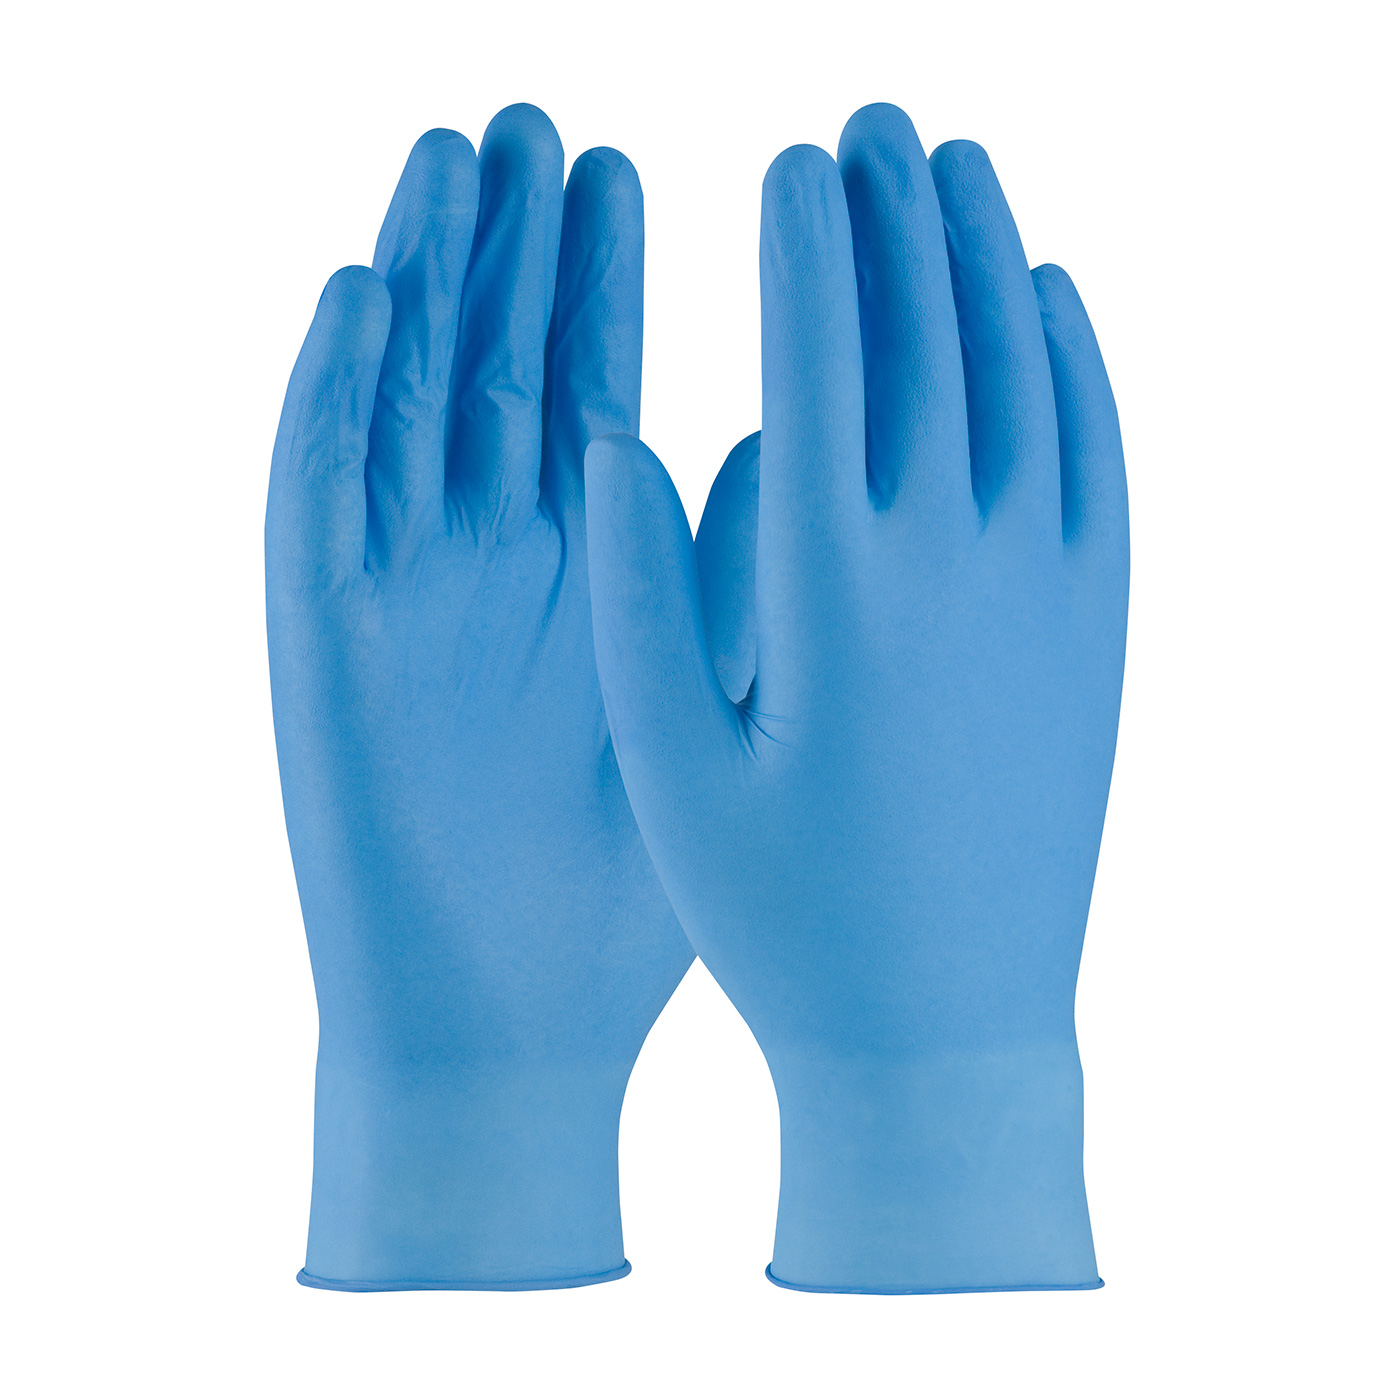 PIP 63-532PF/L Ambi-dex Axle Disposable Nitrile Glove, Powder Free with Textured Grip - 4 mil - Large - Box of 100 PID-63 532PF L